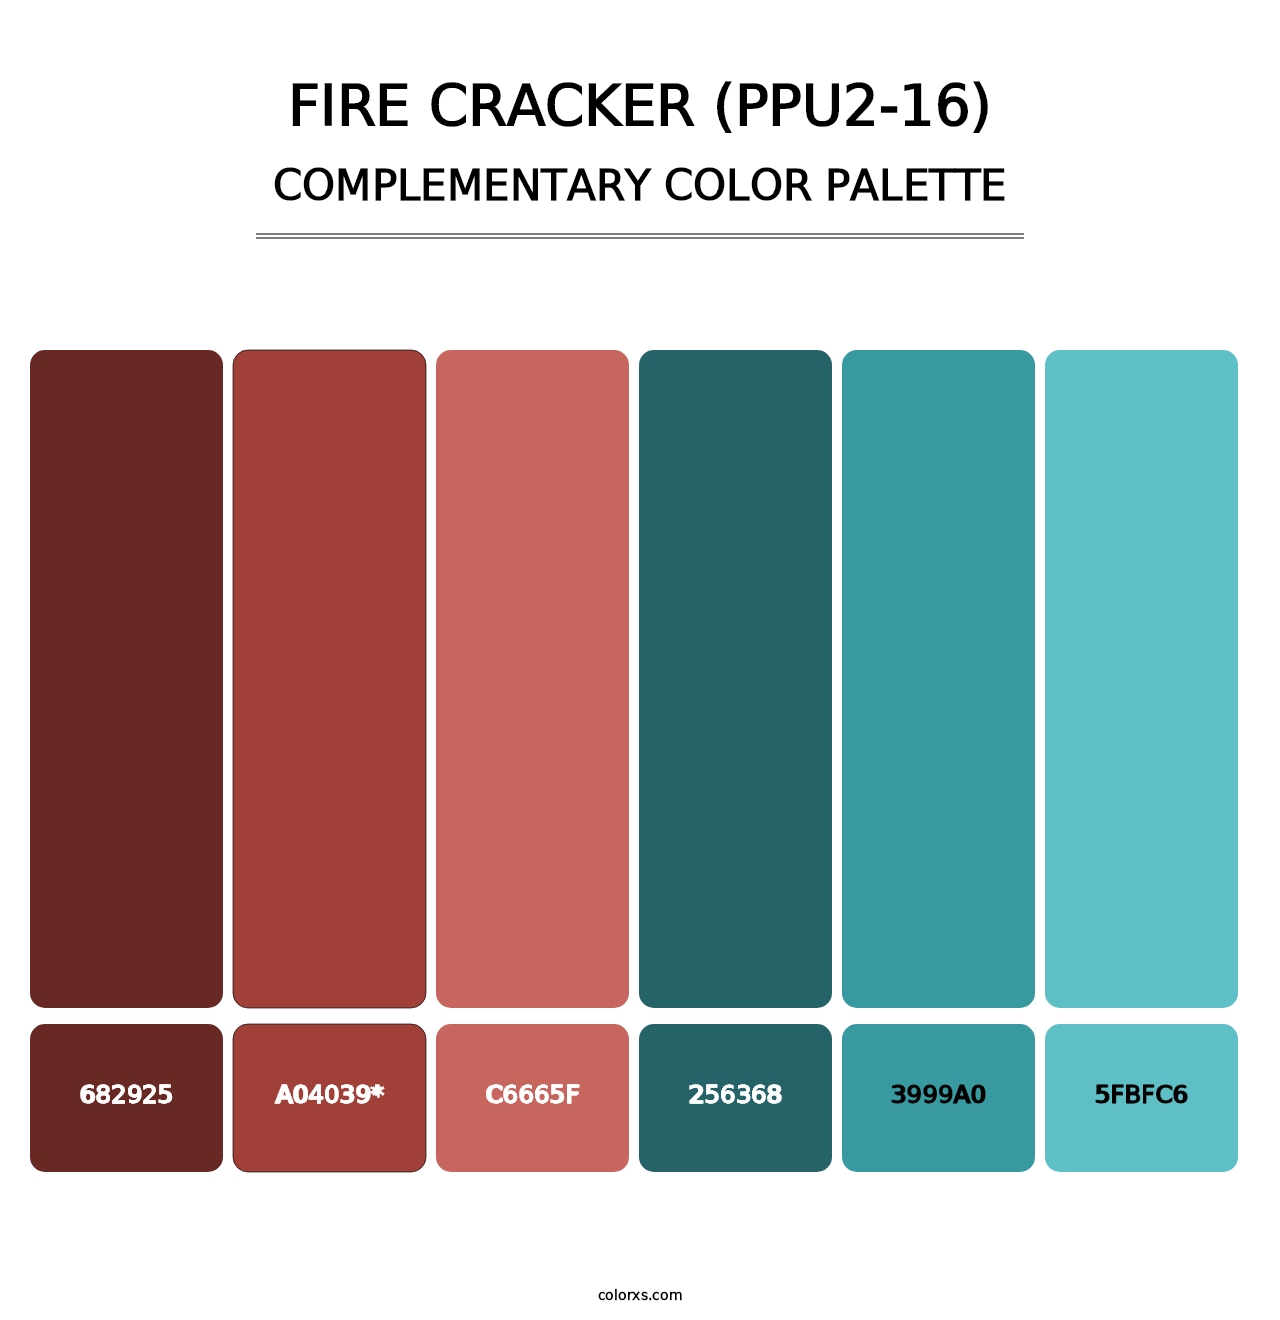 Fire Cracker (PPU2-16) - Complementary Color Palette